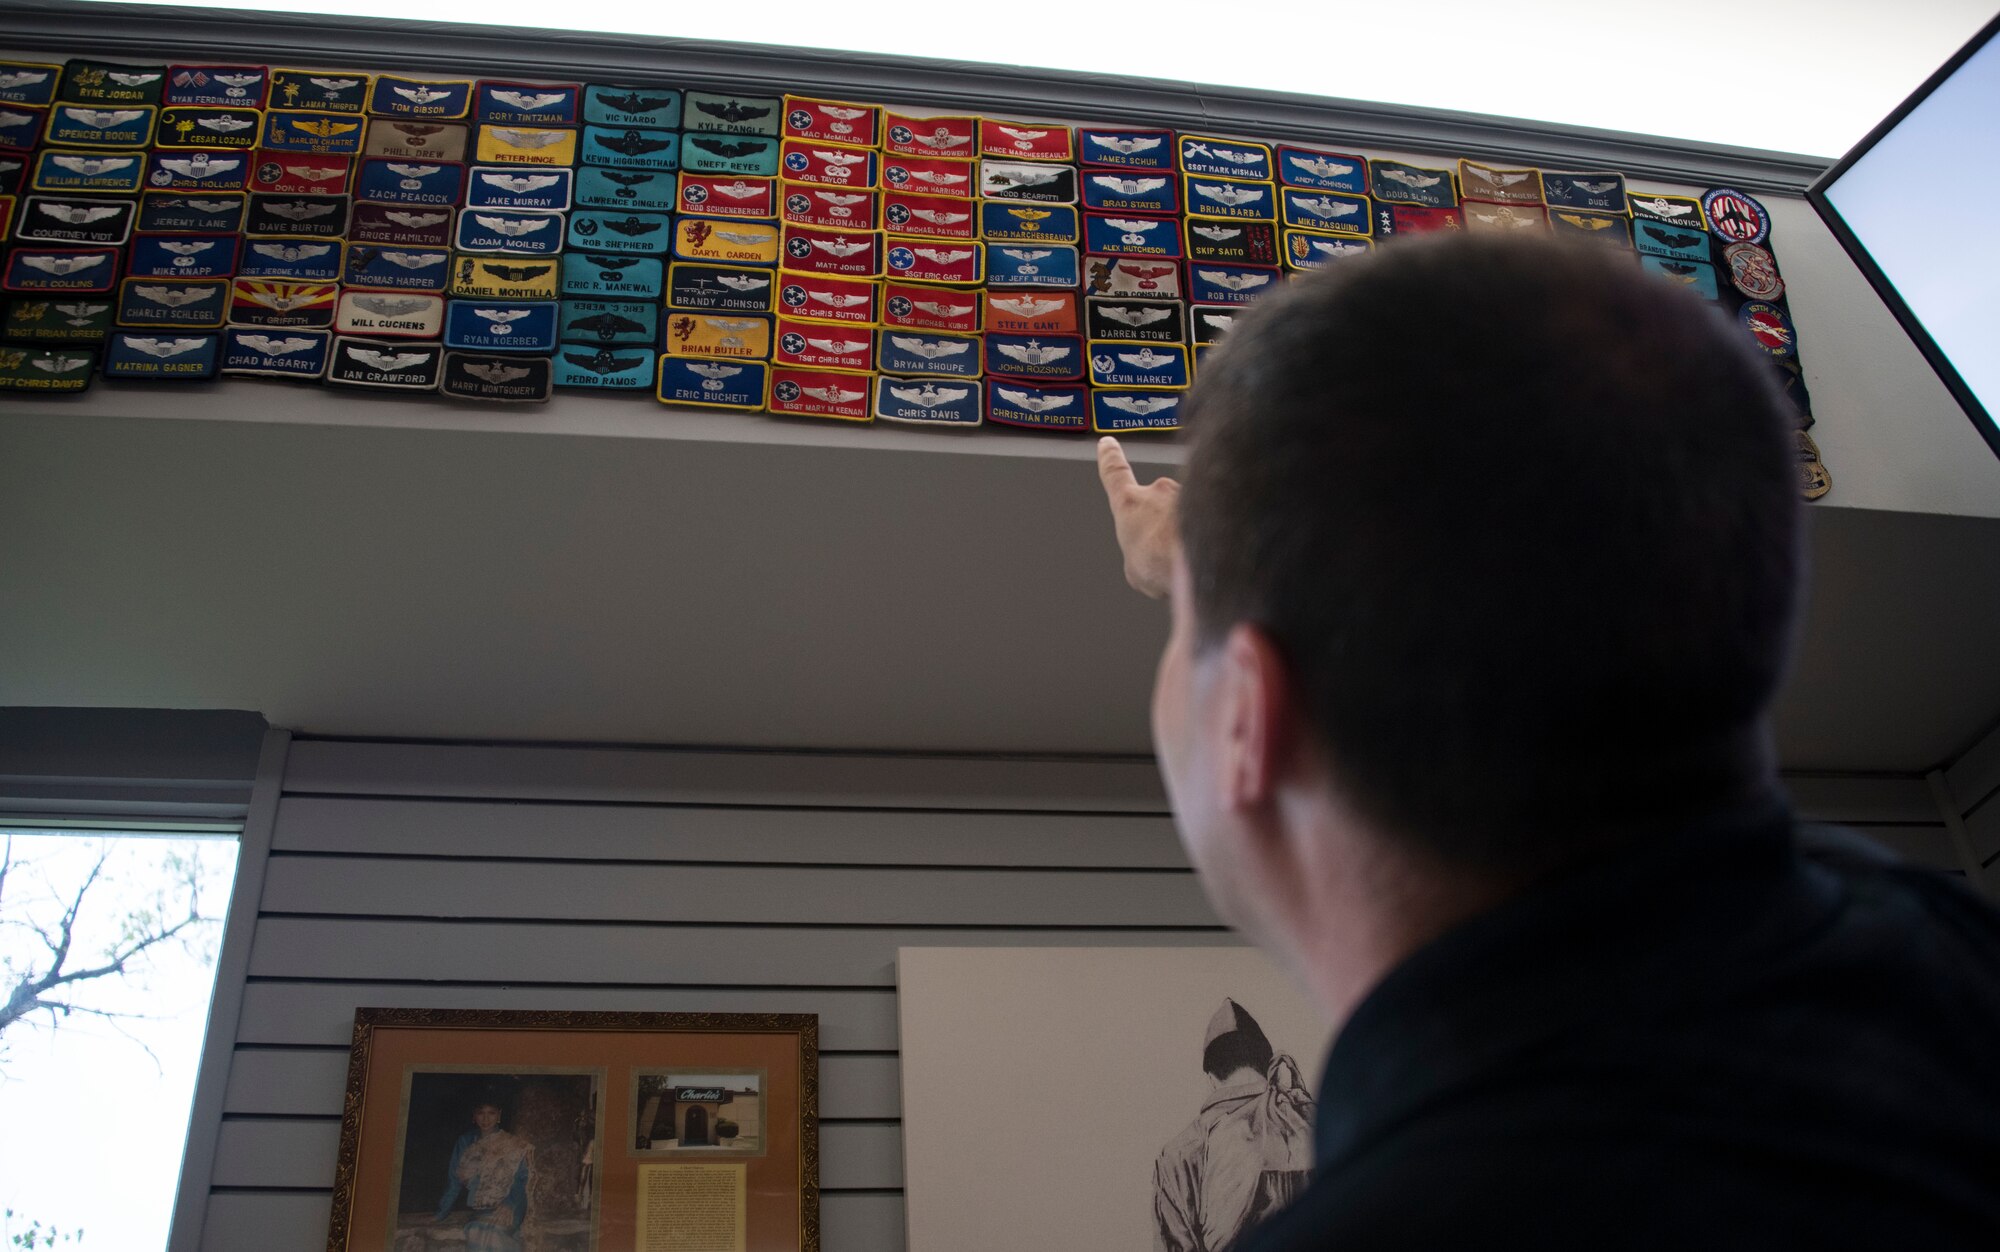 A Charlie’s Lounge patron points to his patch on display inside of the lounge April 15, 2021, at Altus Air Force Base, Oklahoma. It has been a longstanding tradition for Charlie to collect and showcase patches from Airmen. (U.S. Air Force photo by Airman 1st Class Amanda Lovelace)